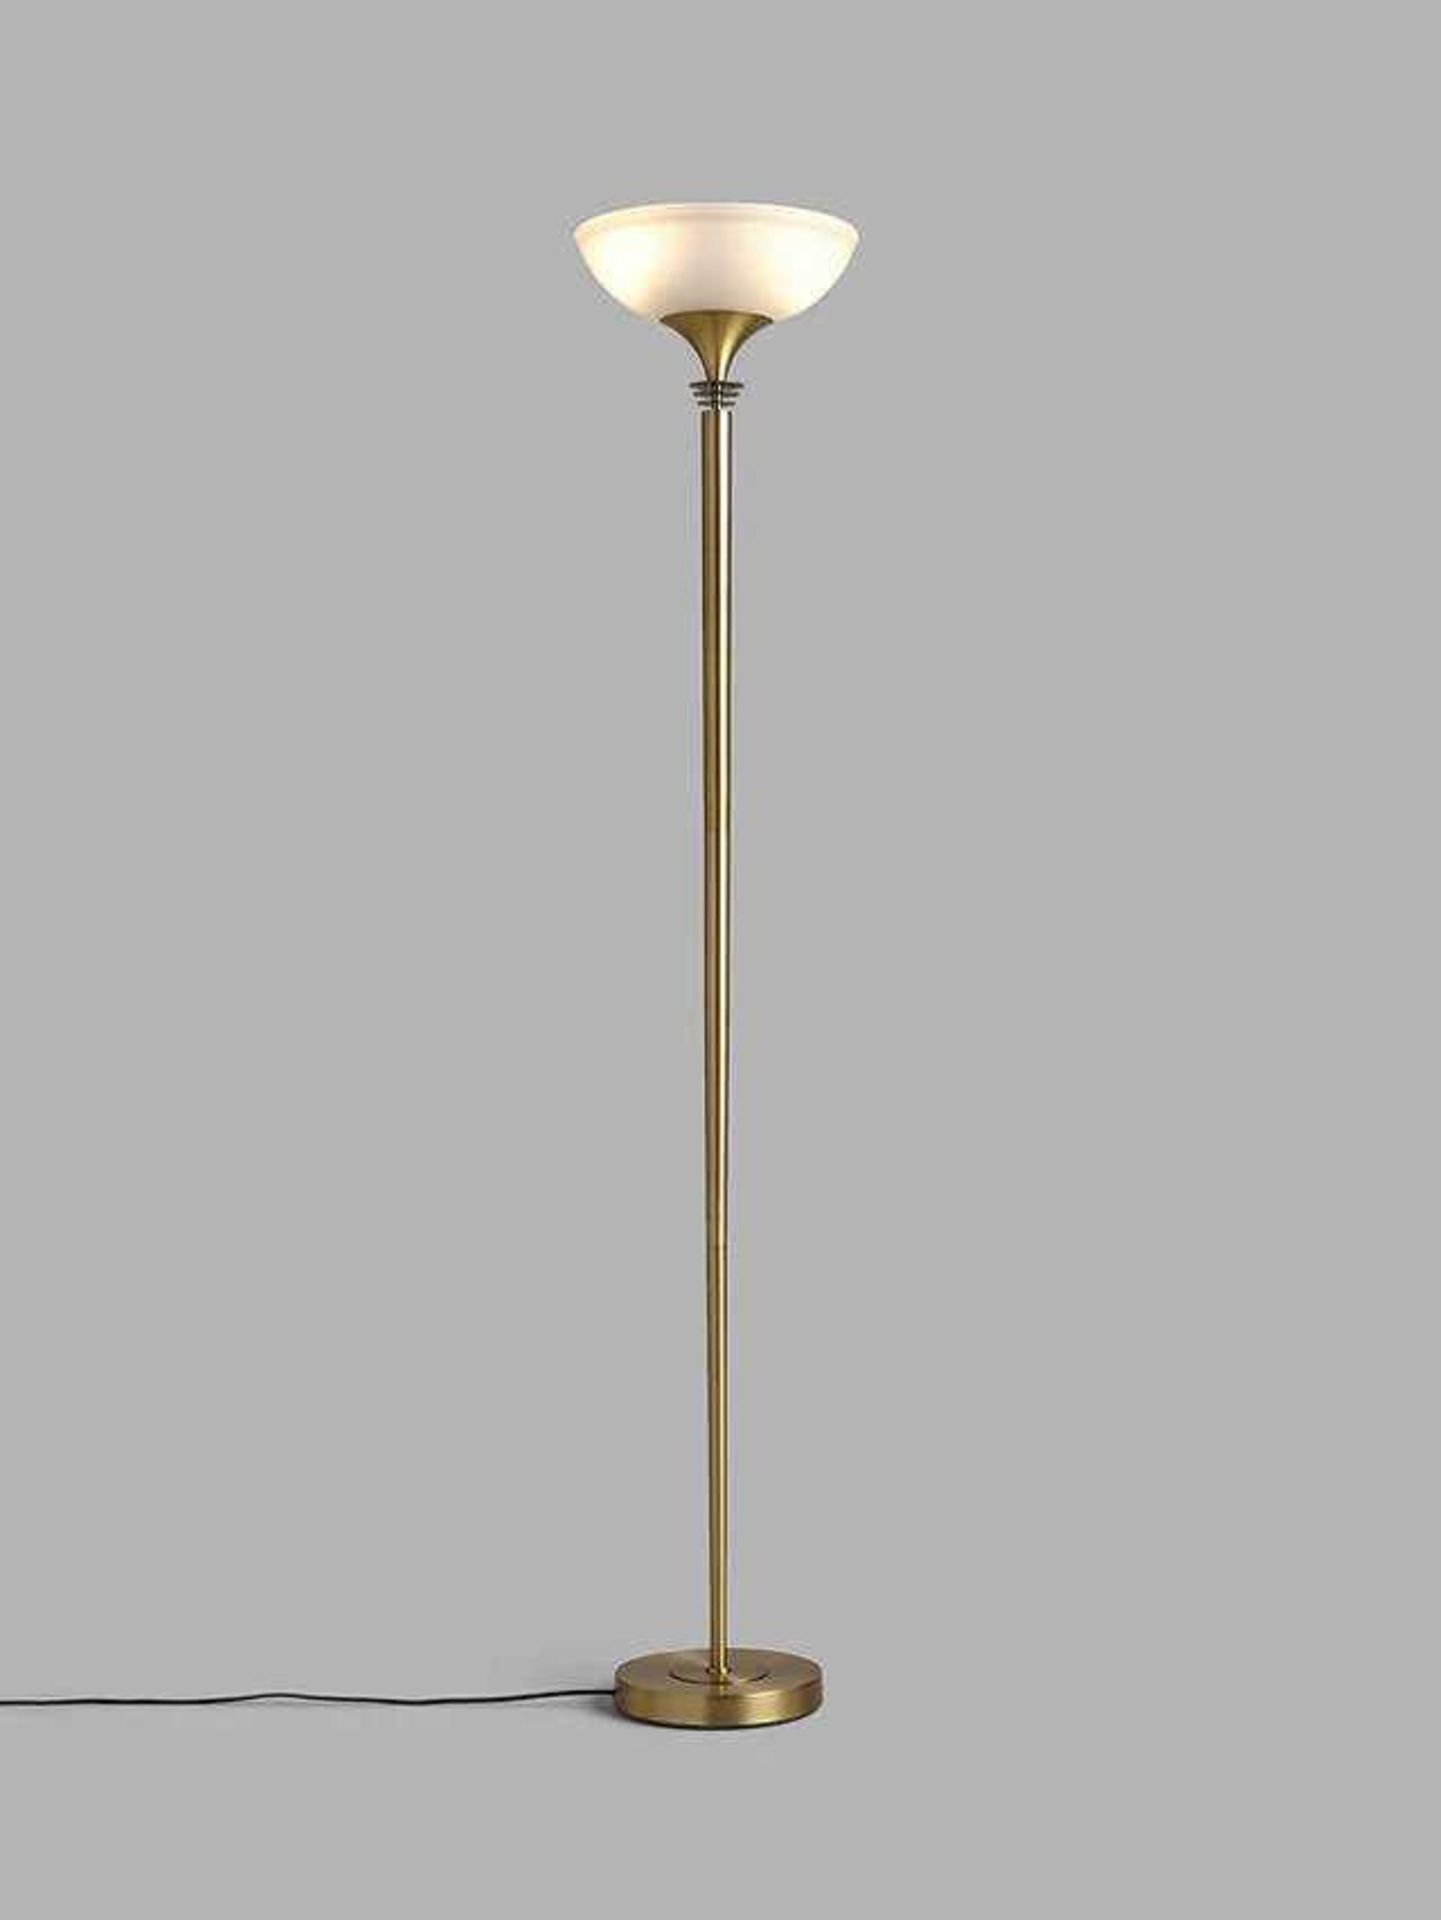 Rrp £100 Boxed Azure Antique Brass Finish Glass Shade Floor Standing Lamp - Image 2 of 2